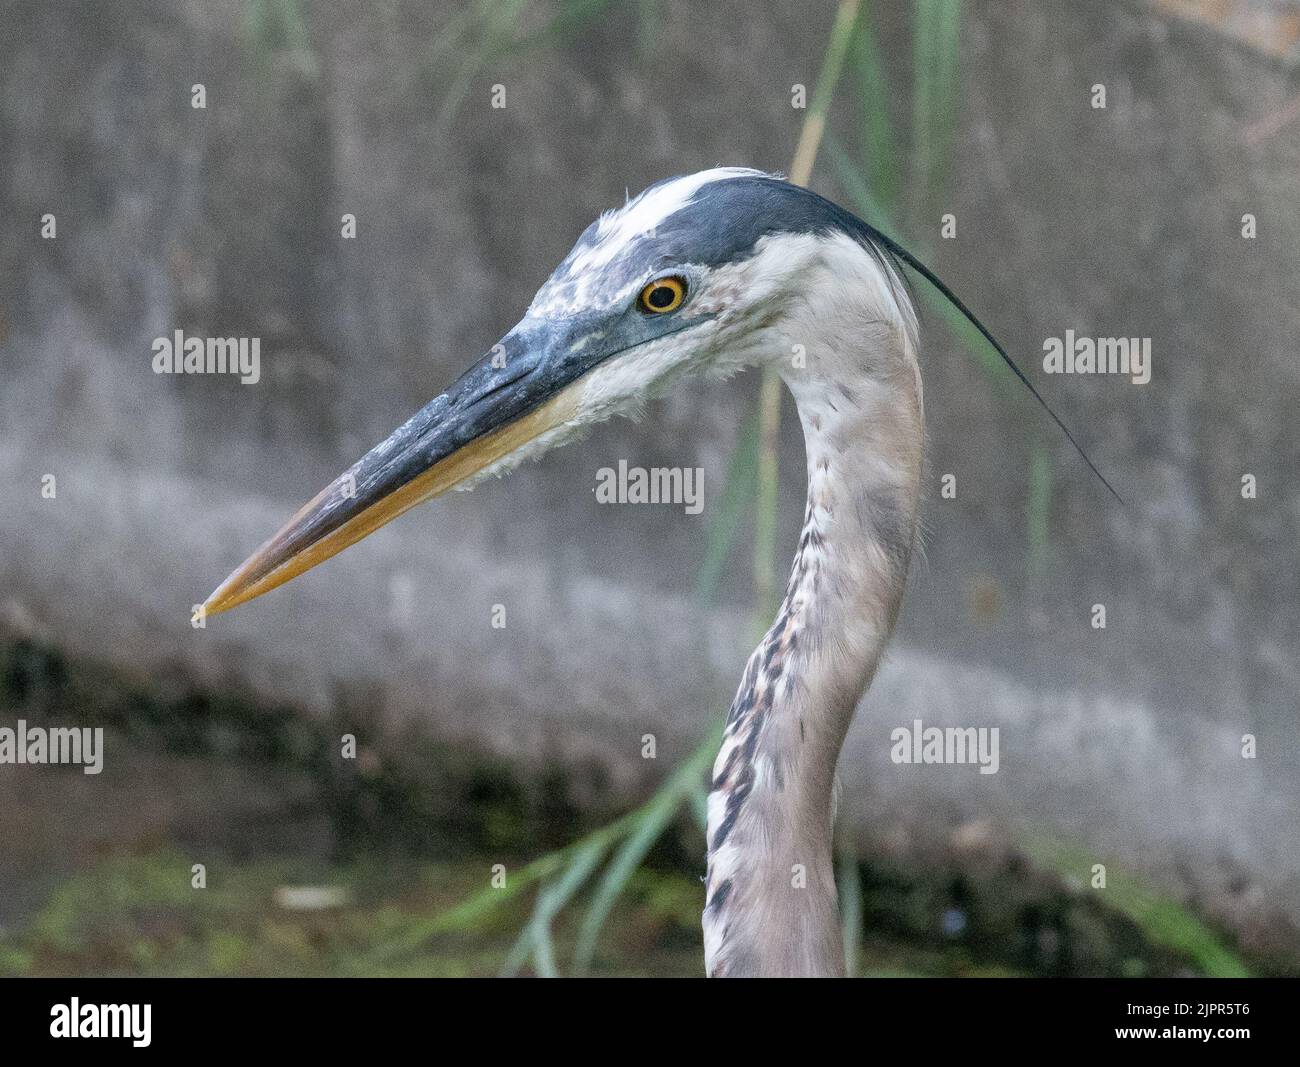 Close up of the head and top of the neck of a Great Blue Heron photographed with selective focus. Stock Photo